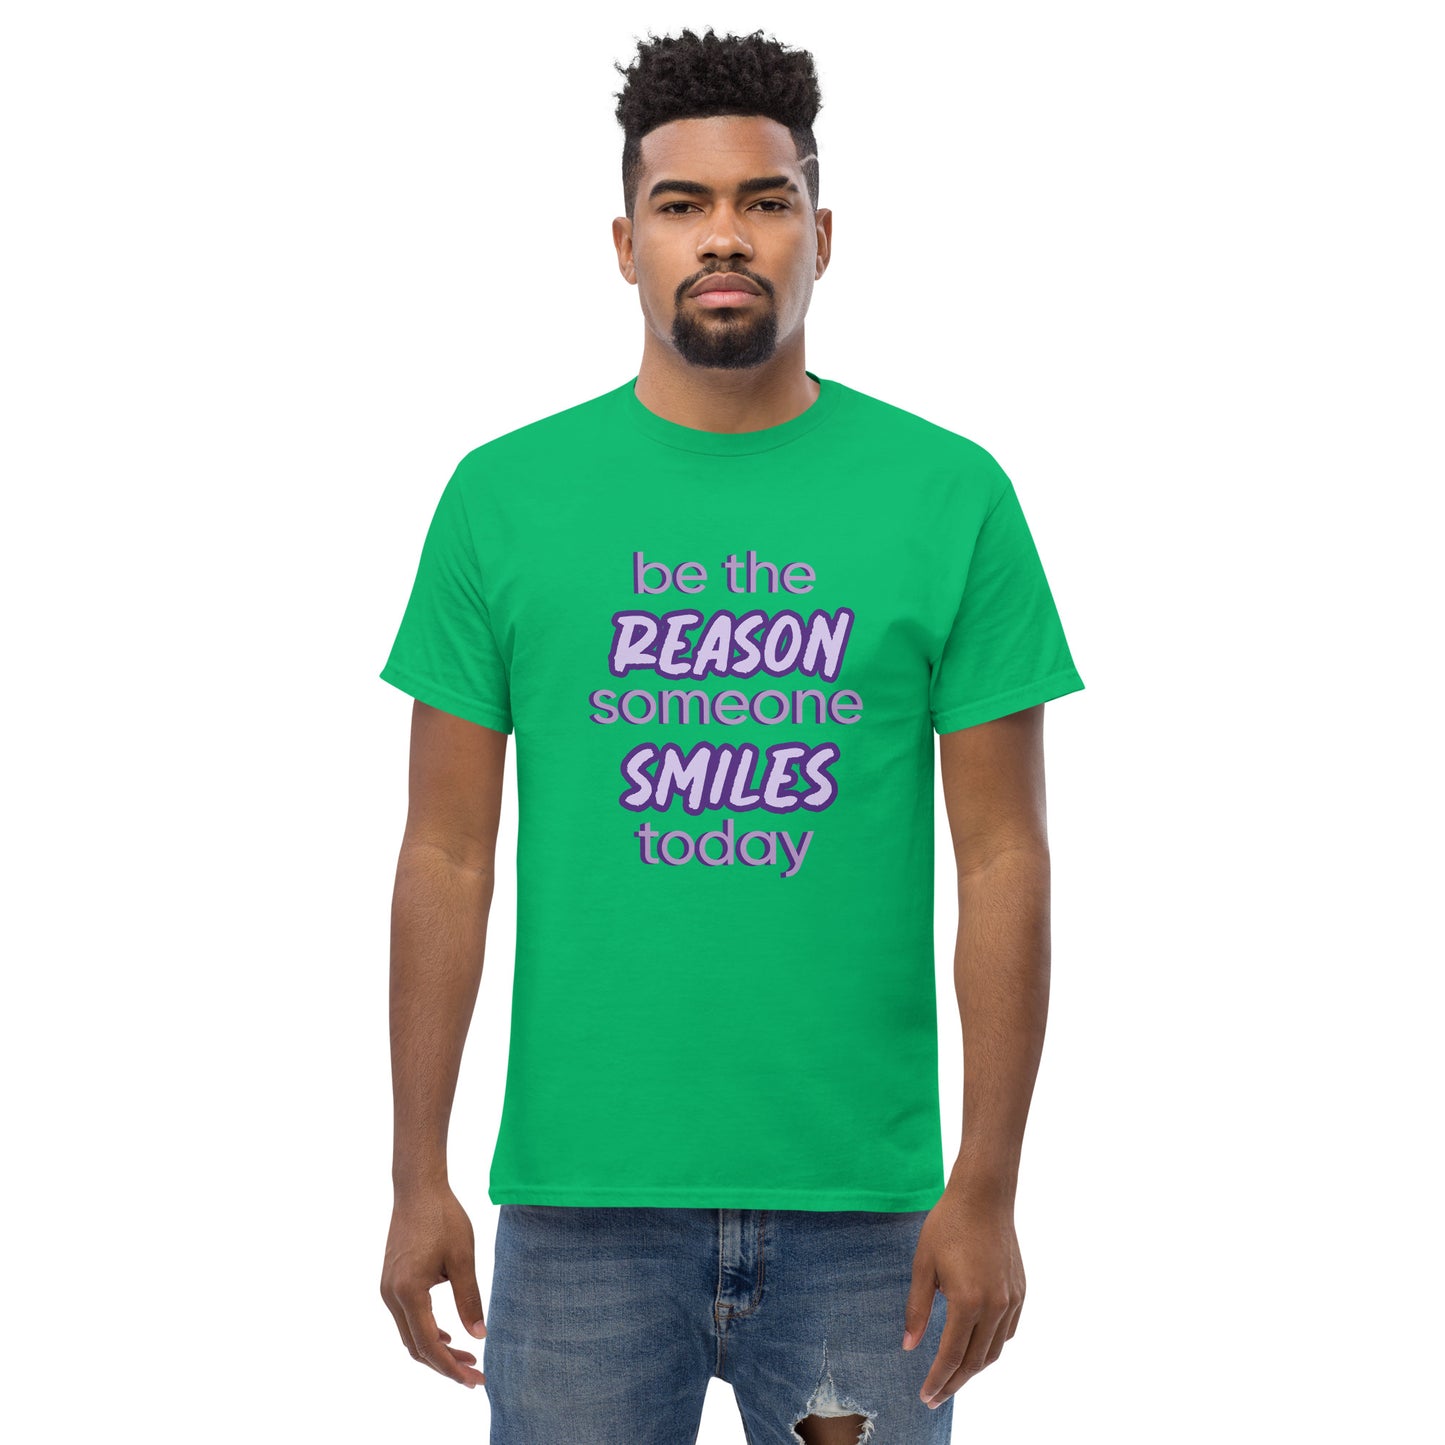 Men with irish green T-shirt and the quote "be the reason someone smiles today" in purple on it. 